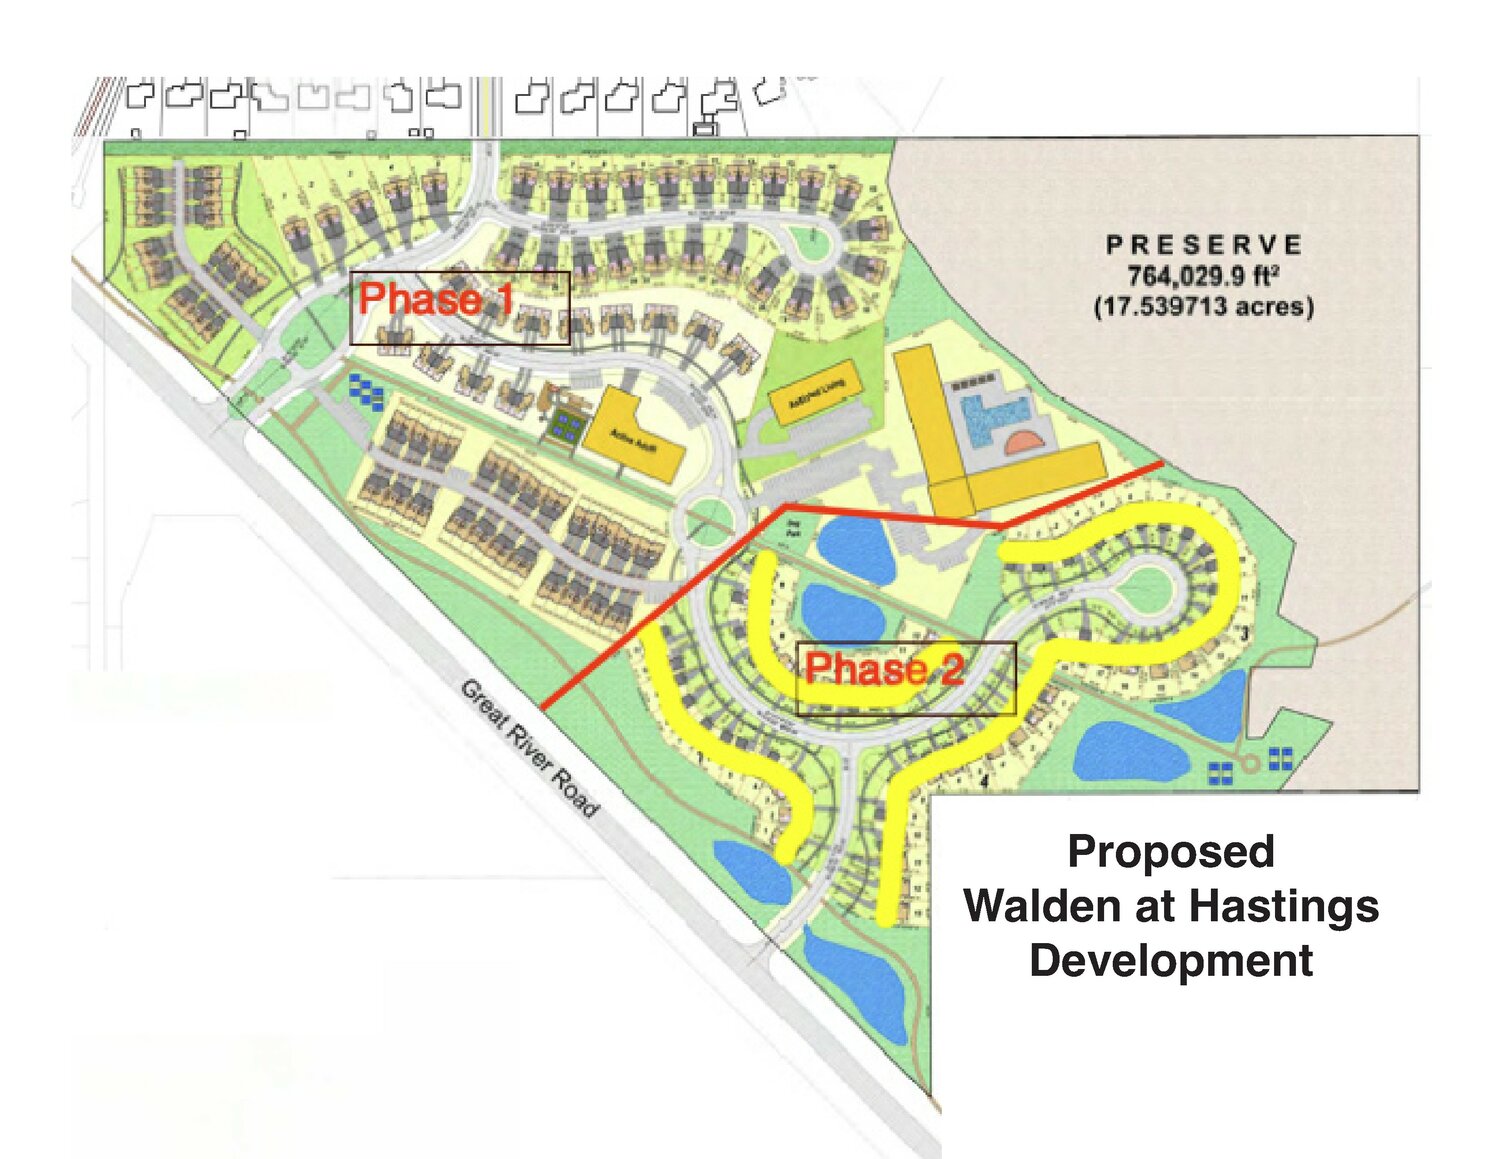 A rendering of the proposed Walden at Hastings development, which would include 450 units.